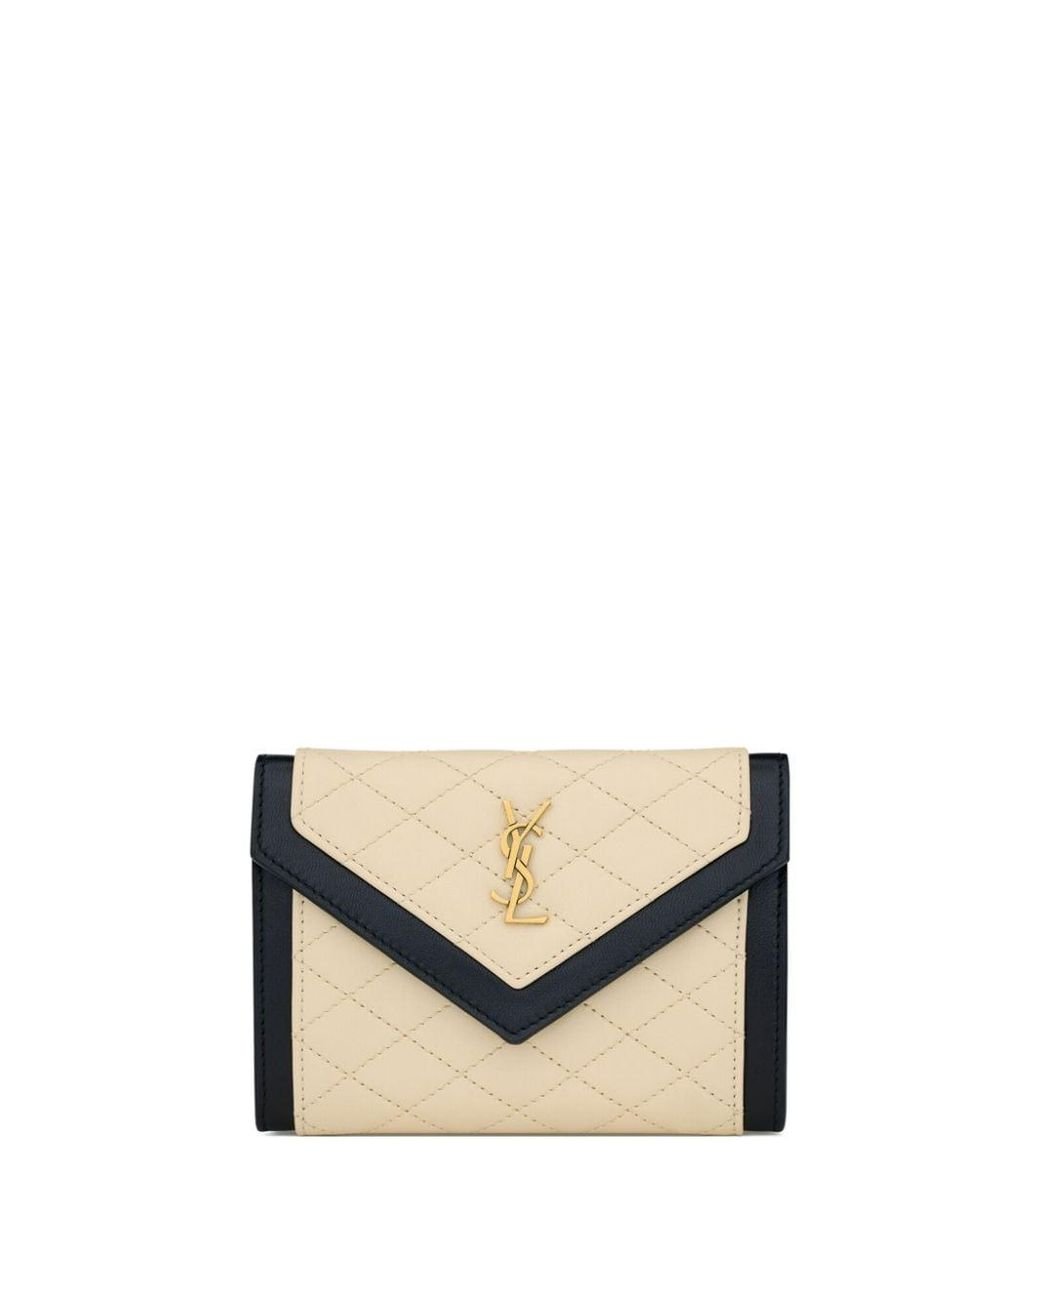 Saint Laurent Small Gaby Quilted Leather Envelope Wallet